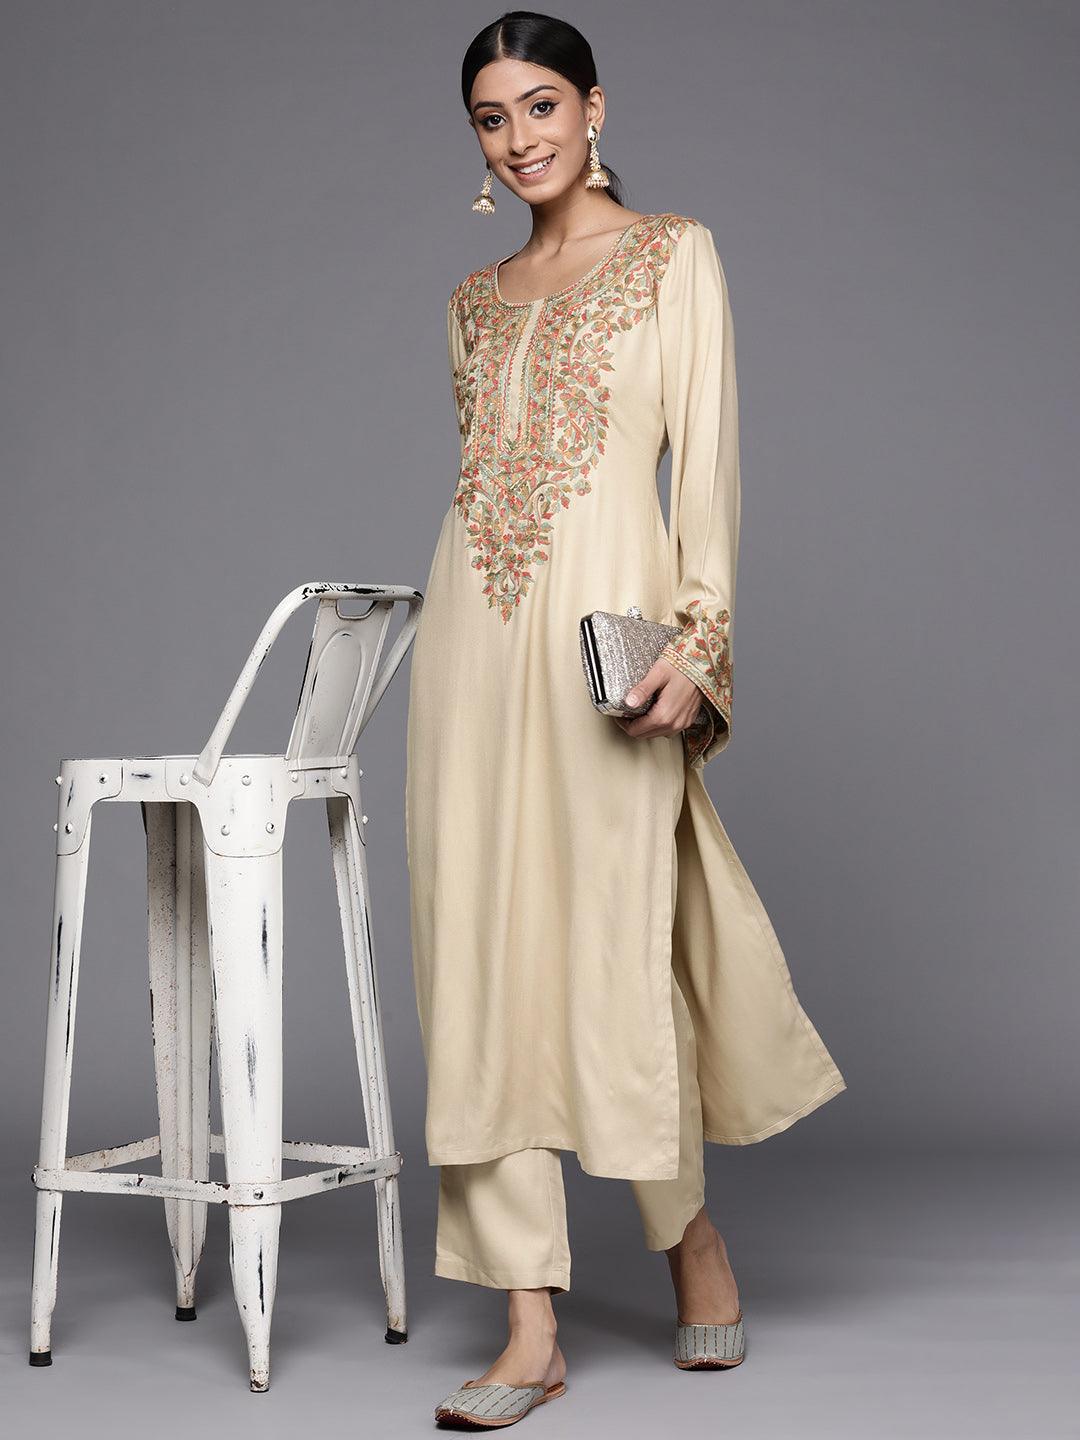 Beige Solid Pashmina Wool Trousers - Libas